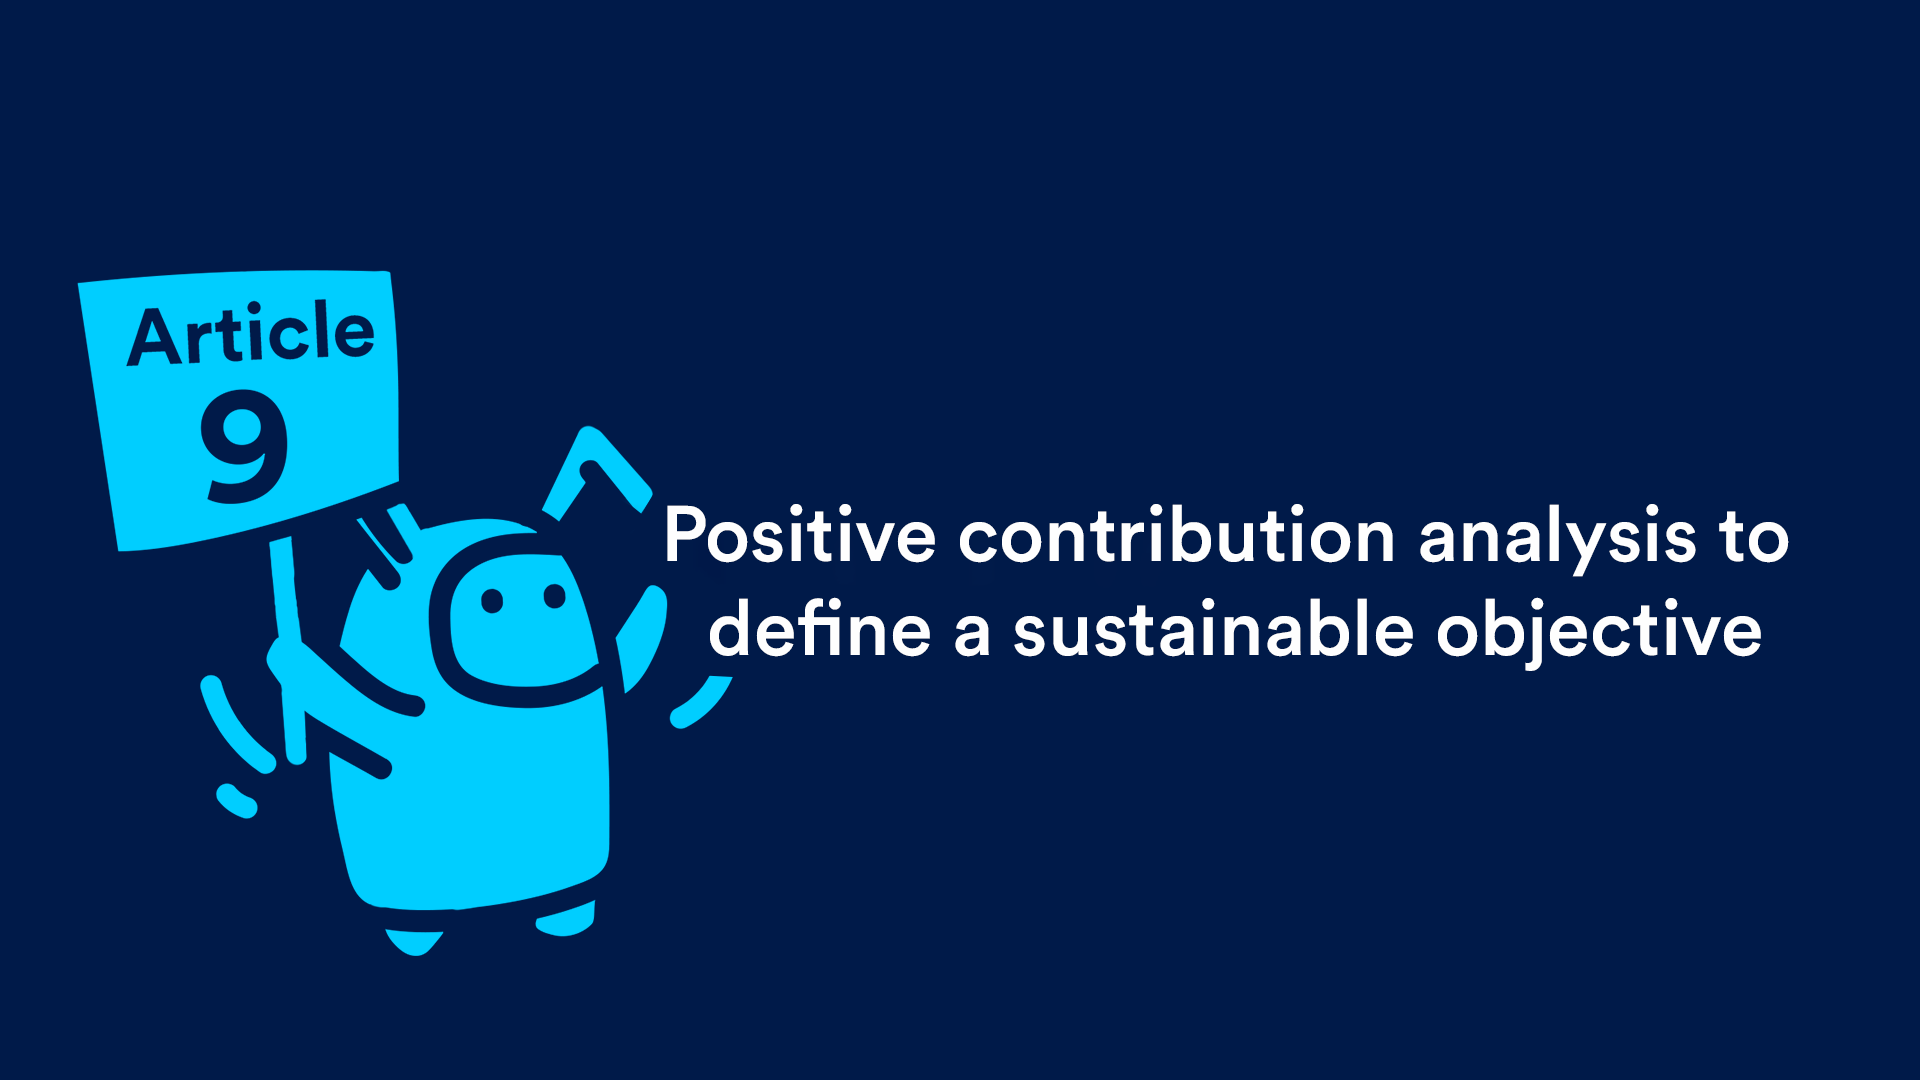 Positive contribution analysis to define a sustainable objective